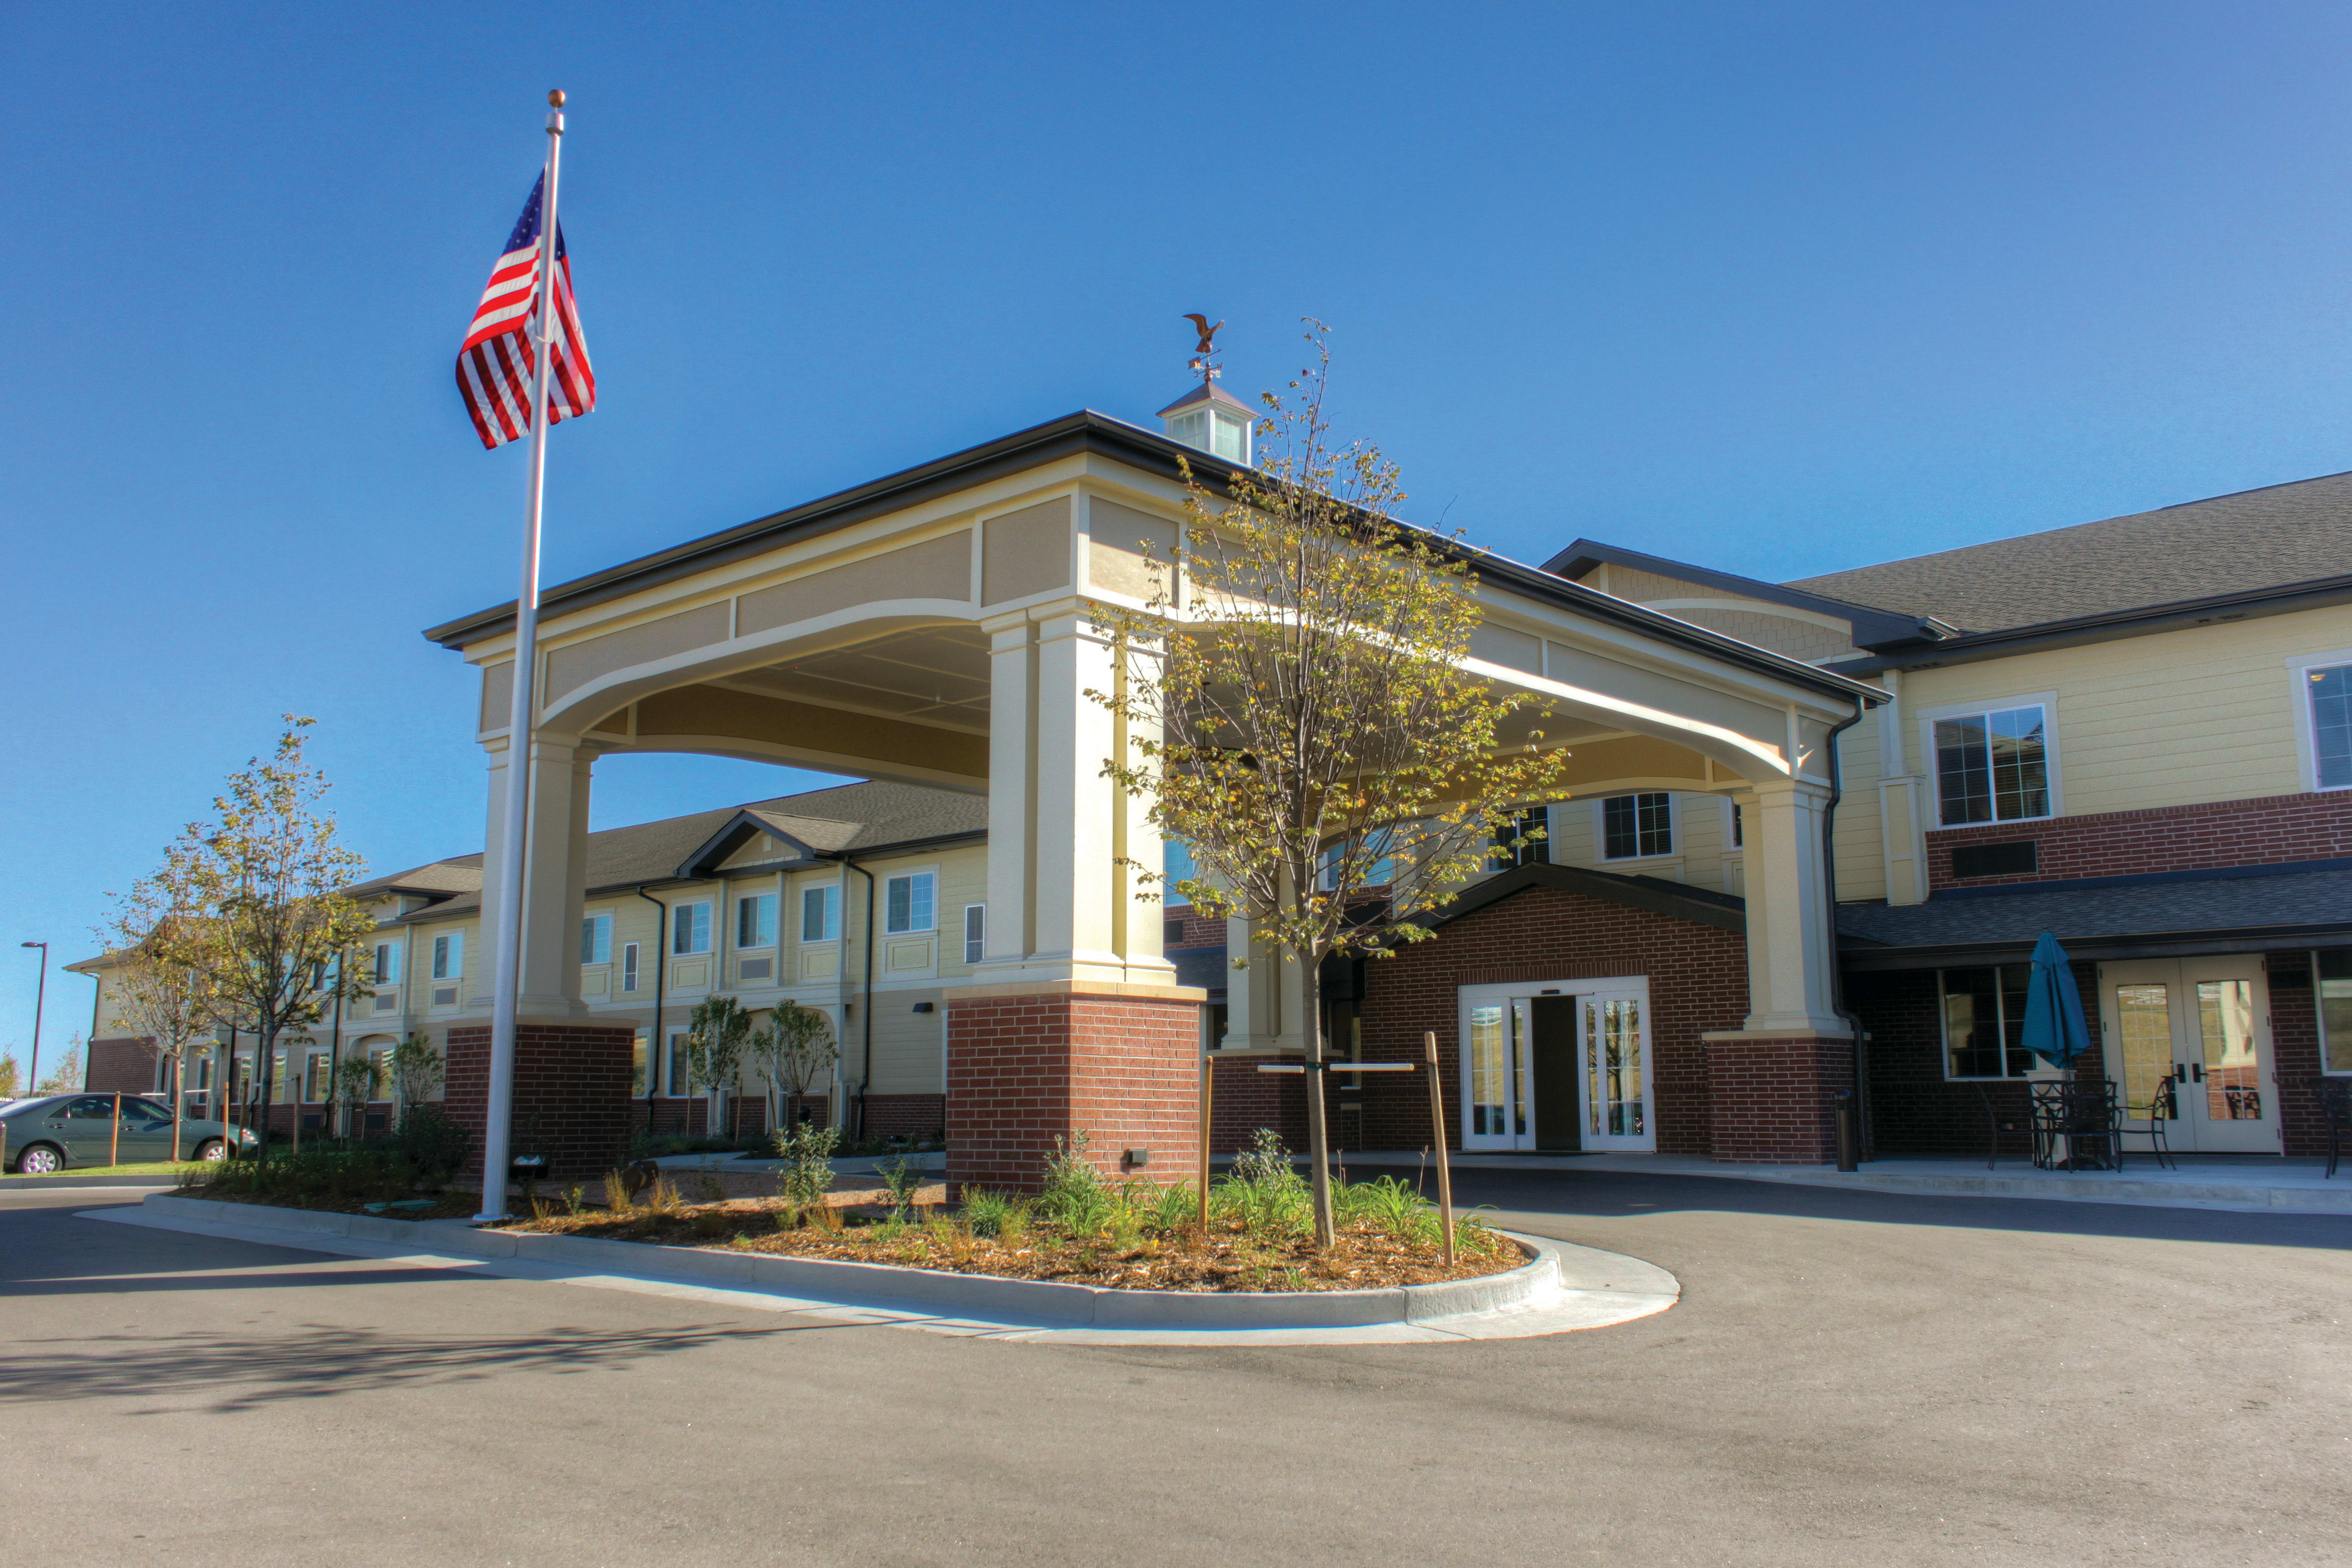 Peakview Assisted Living and Memory Care community entrance